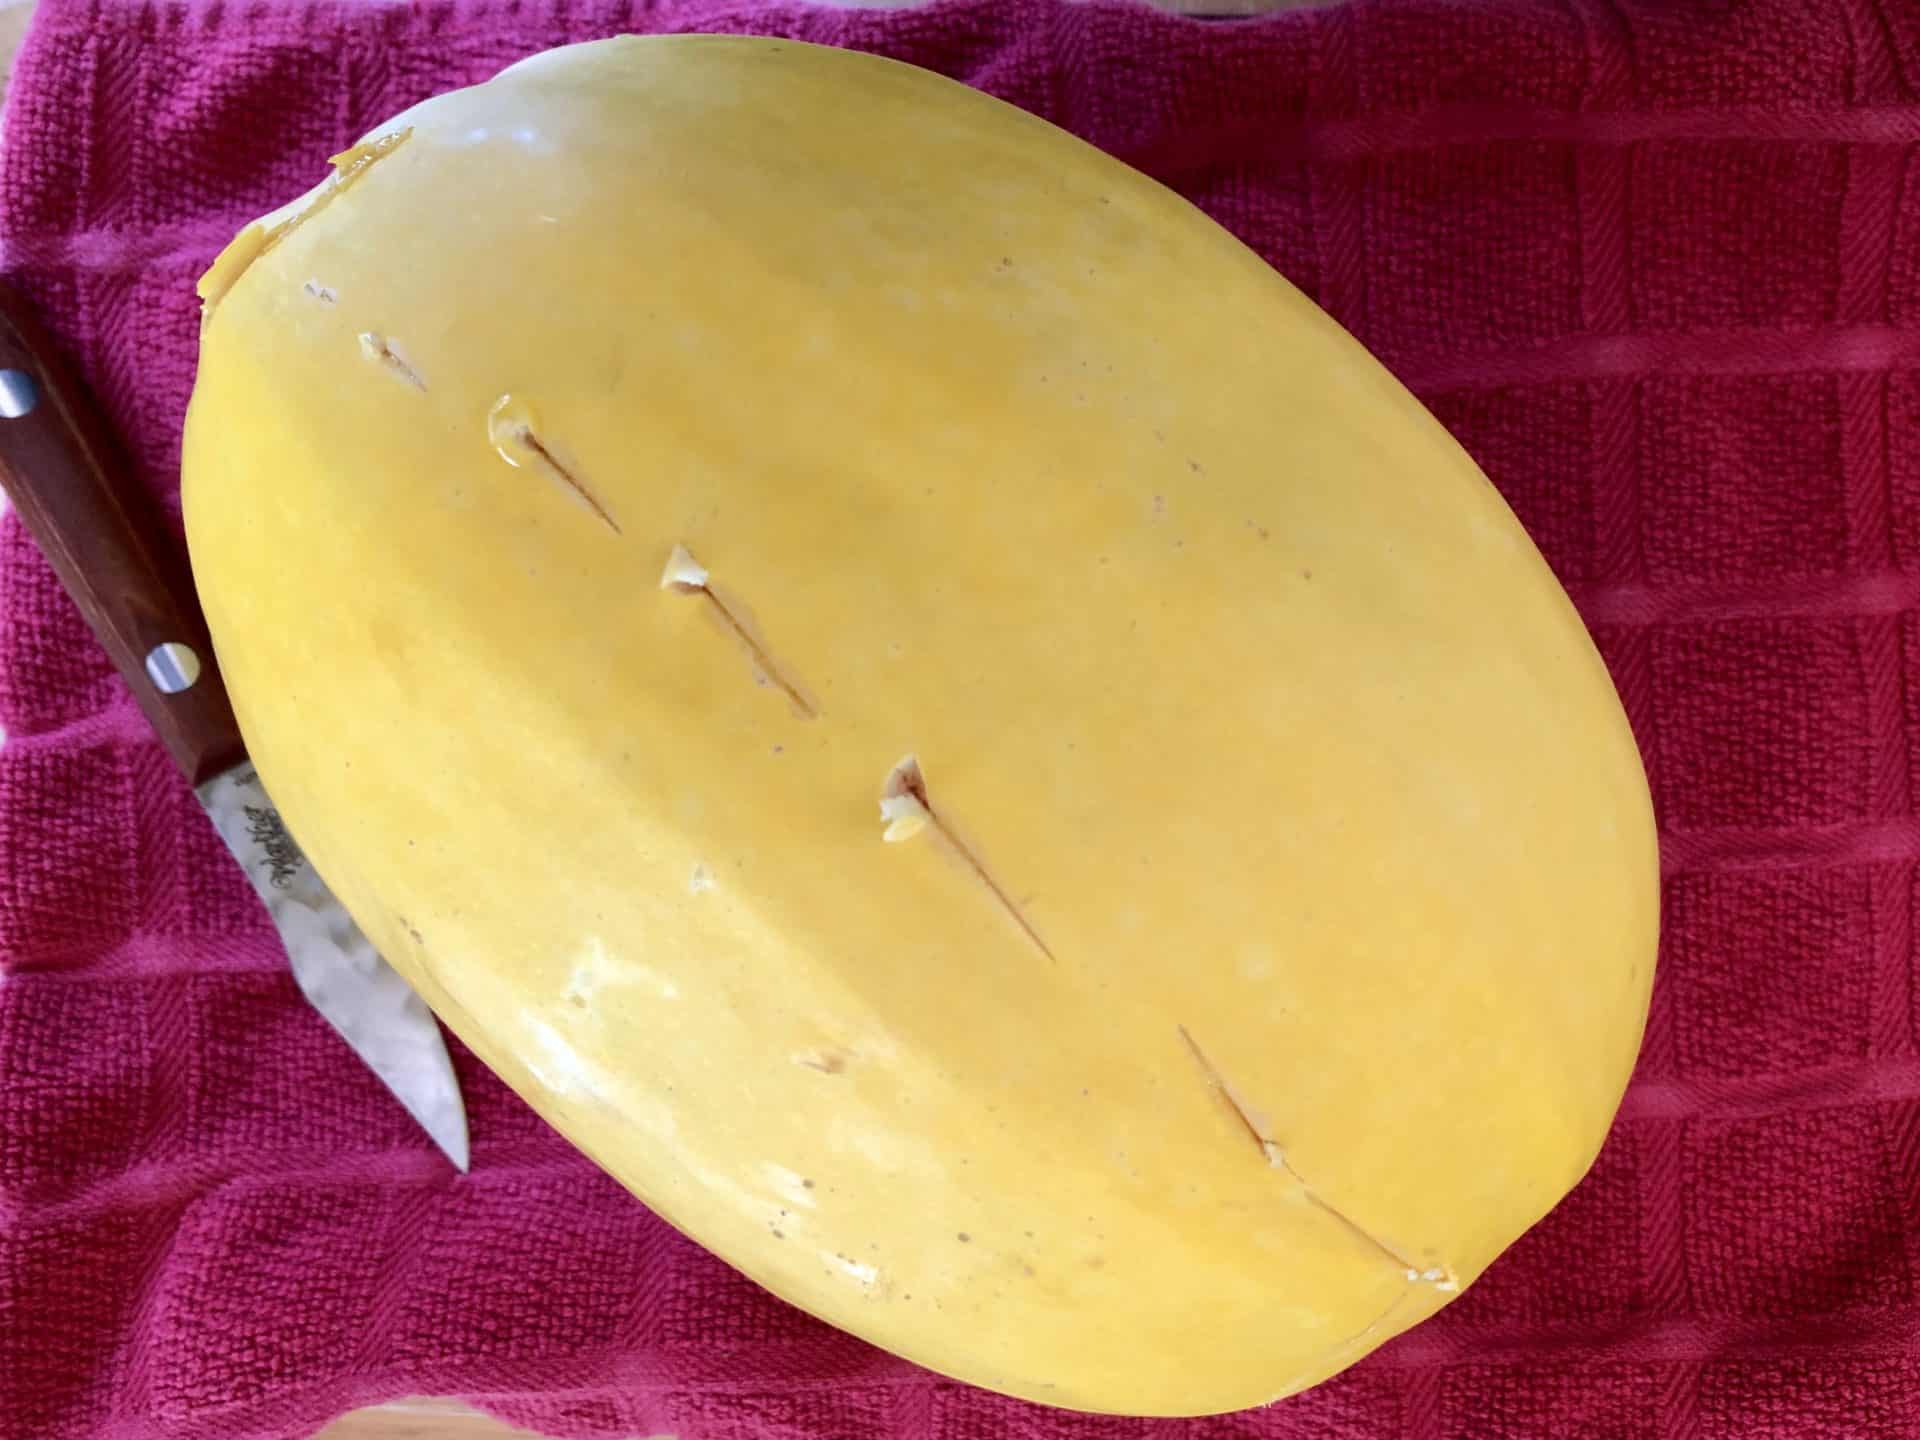 Spaghetti Squash with knife slices down center line